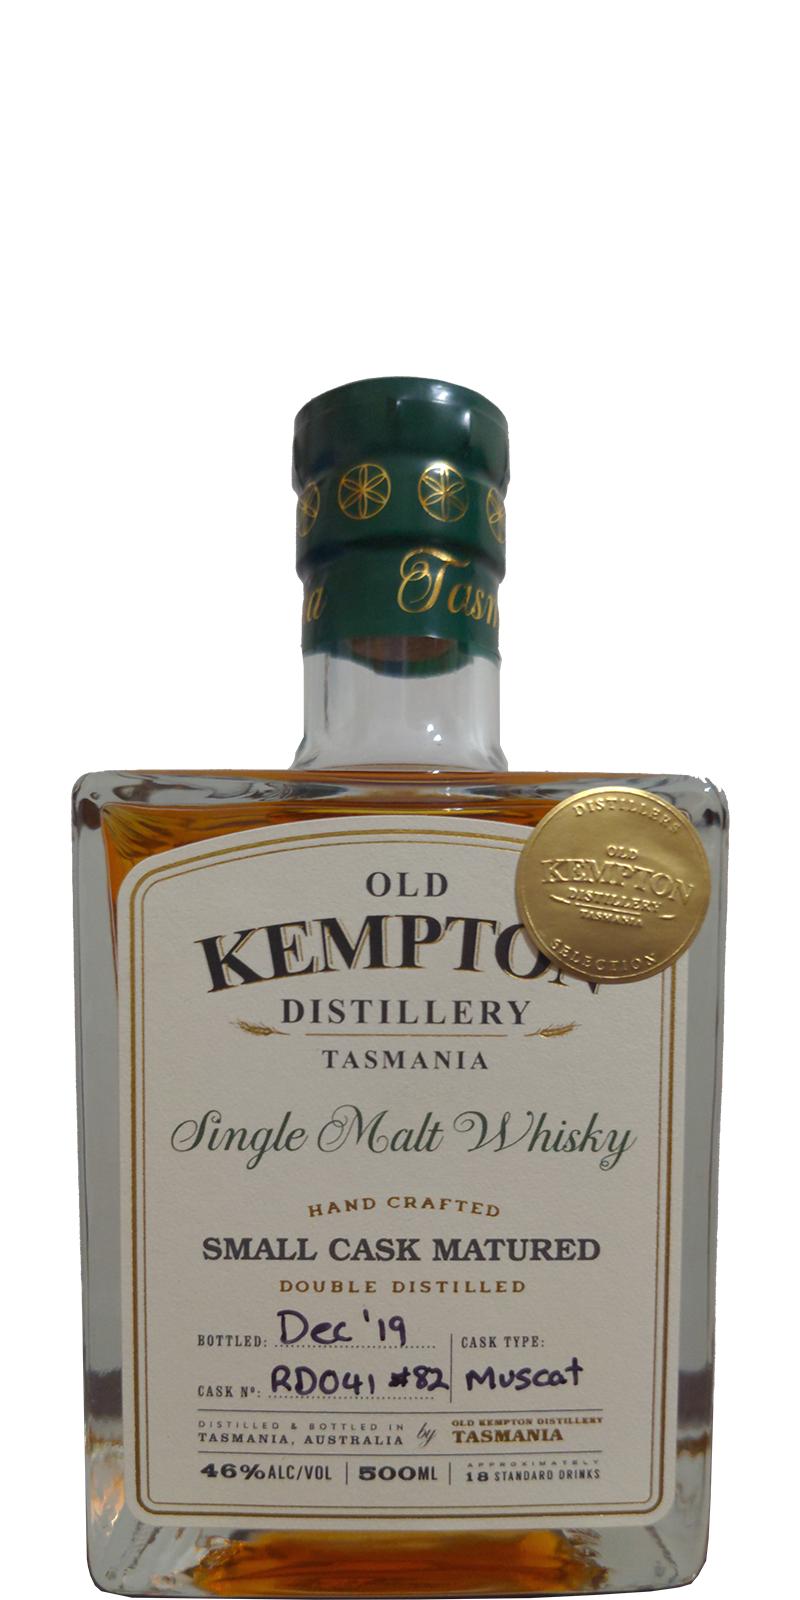 Old Kempton Small Cask Matured Muscat RD041 46% 500ml